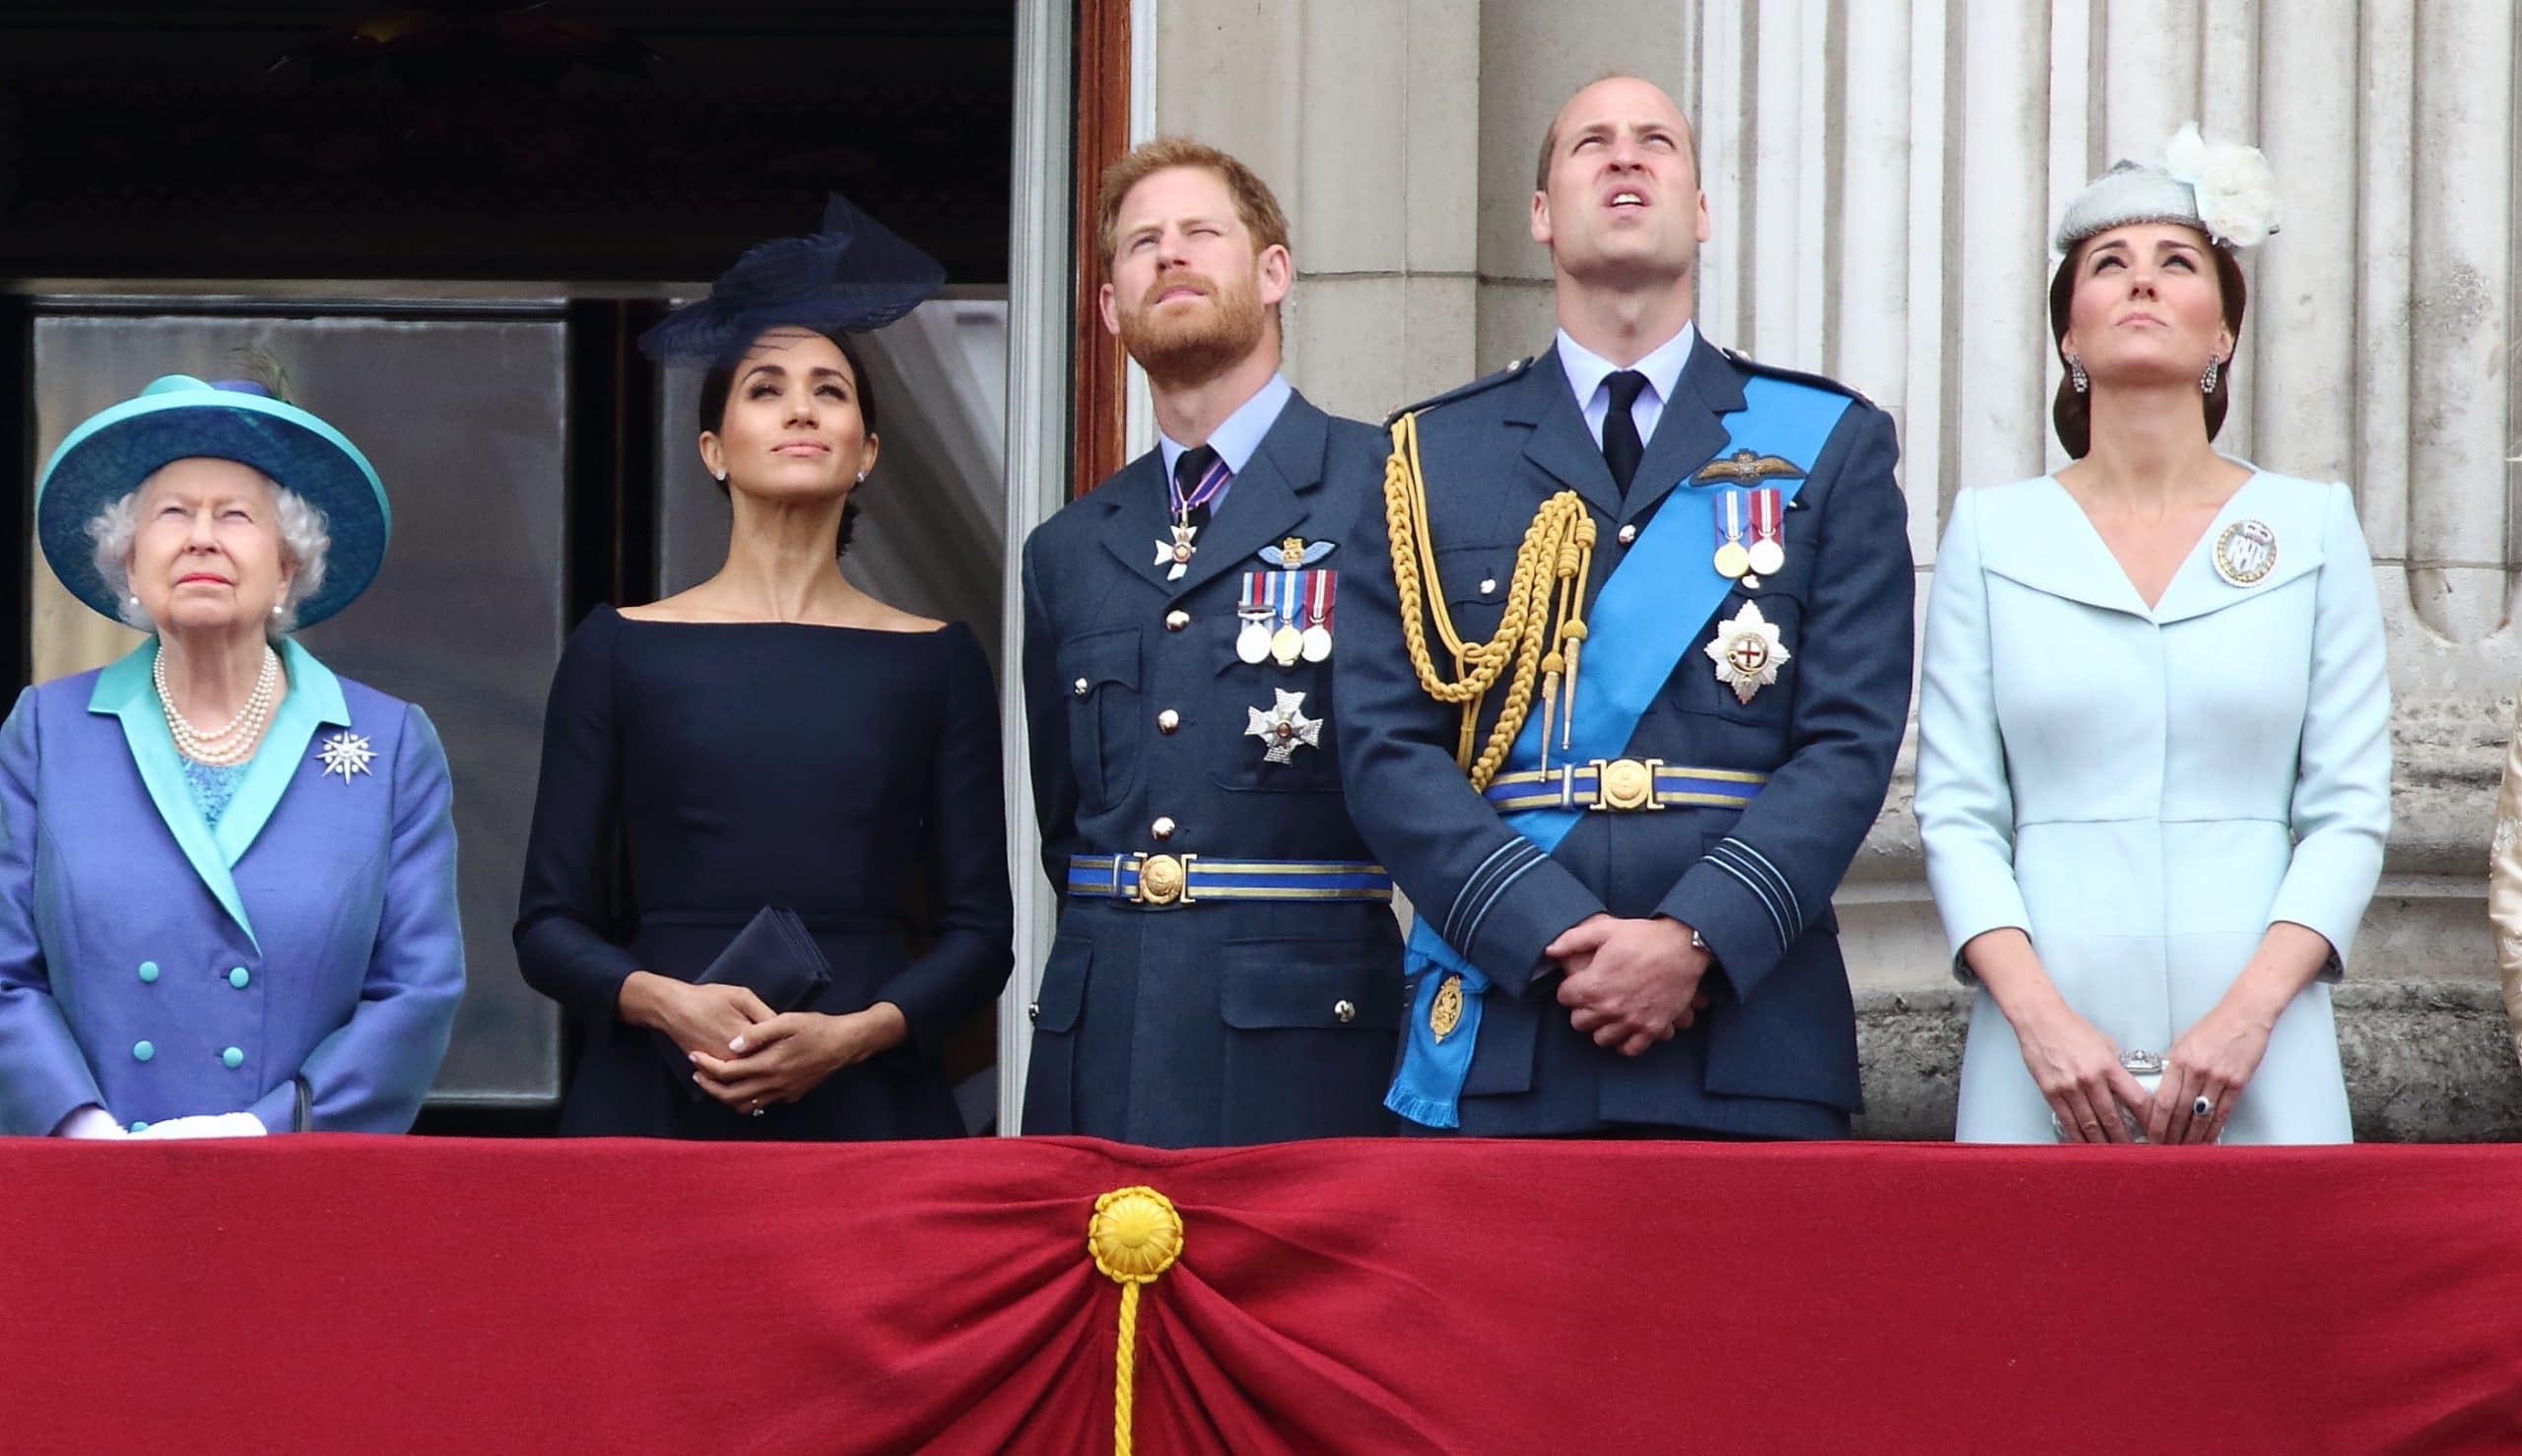 Queen Elizabeth II, Prince Harry and Meghan Markle (The Duke and Duchess of Sussex) with Prince William and Kate Middleton 